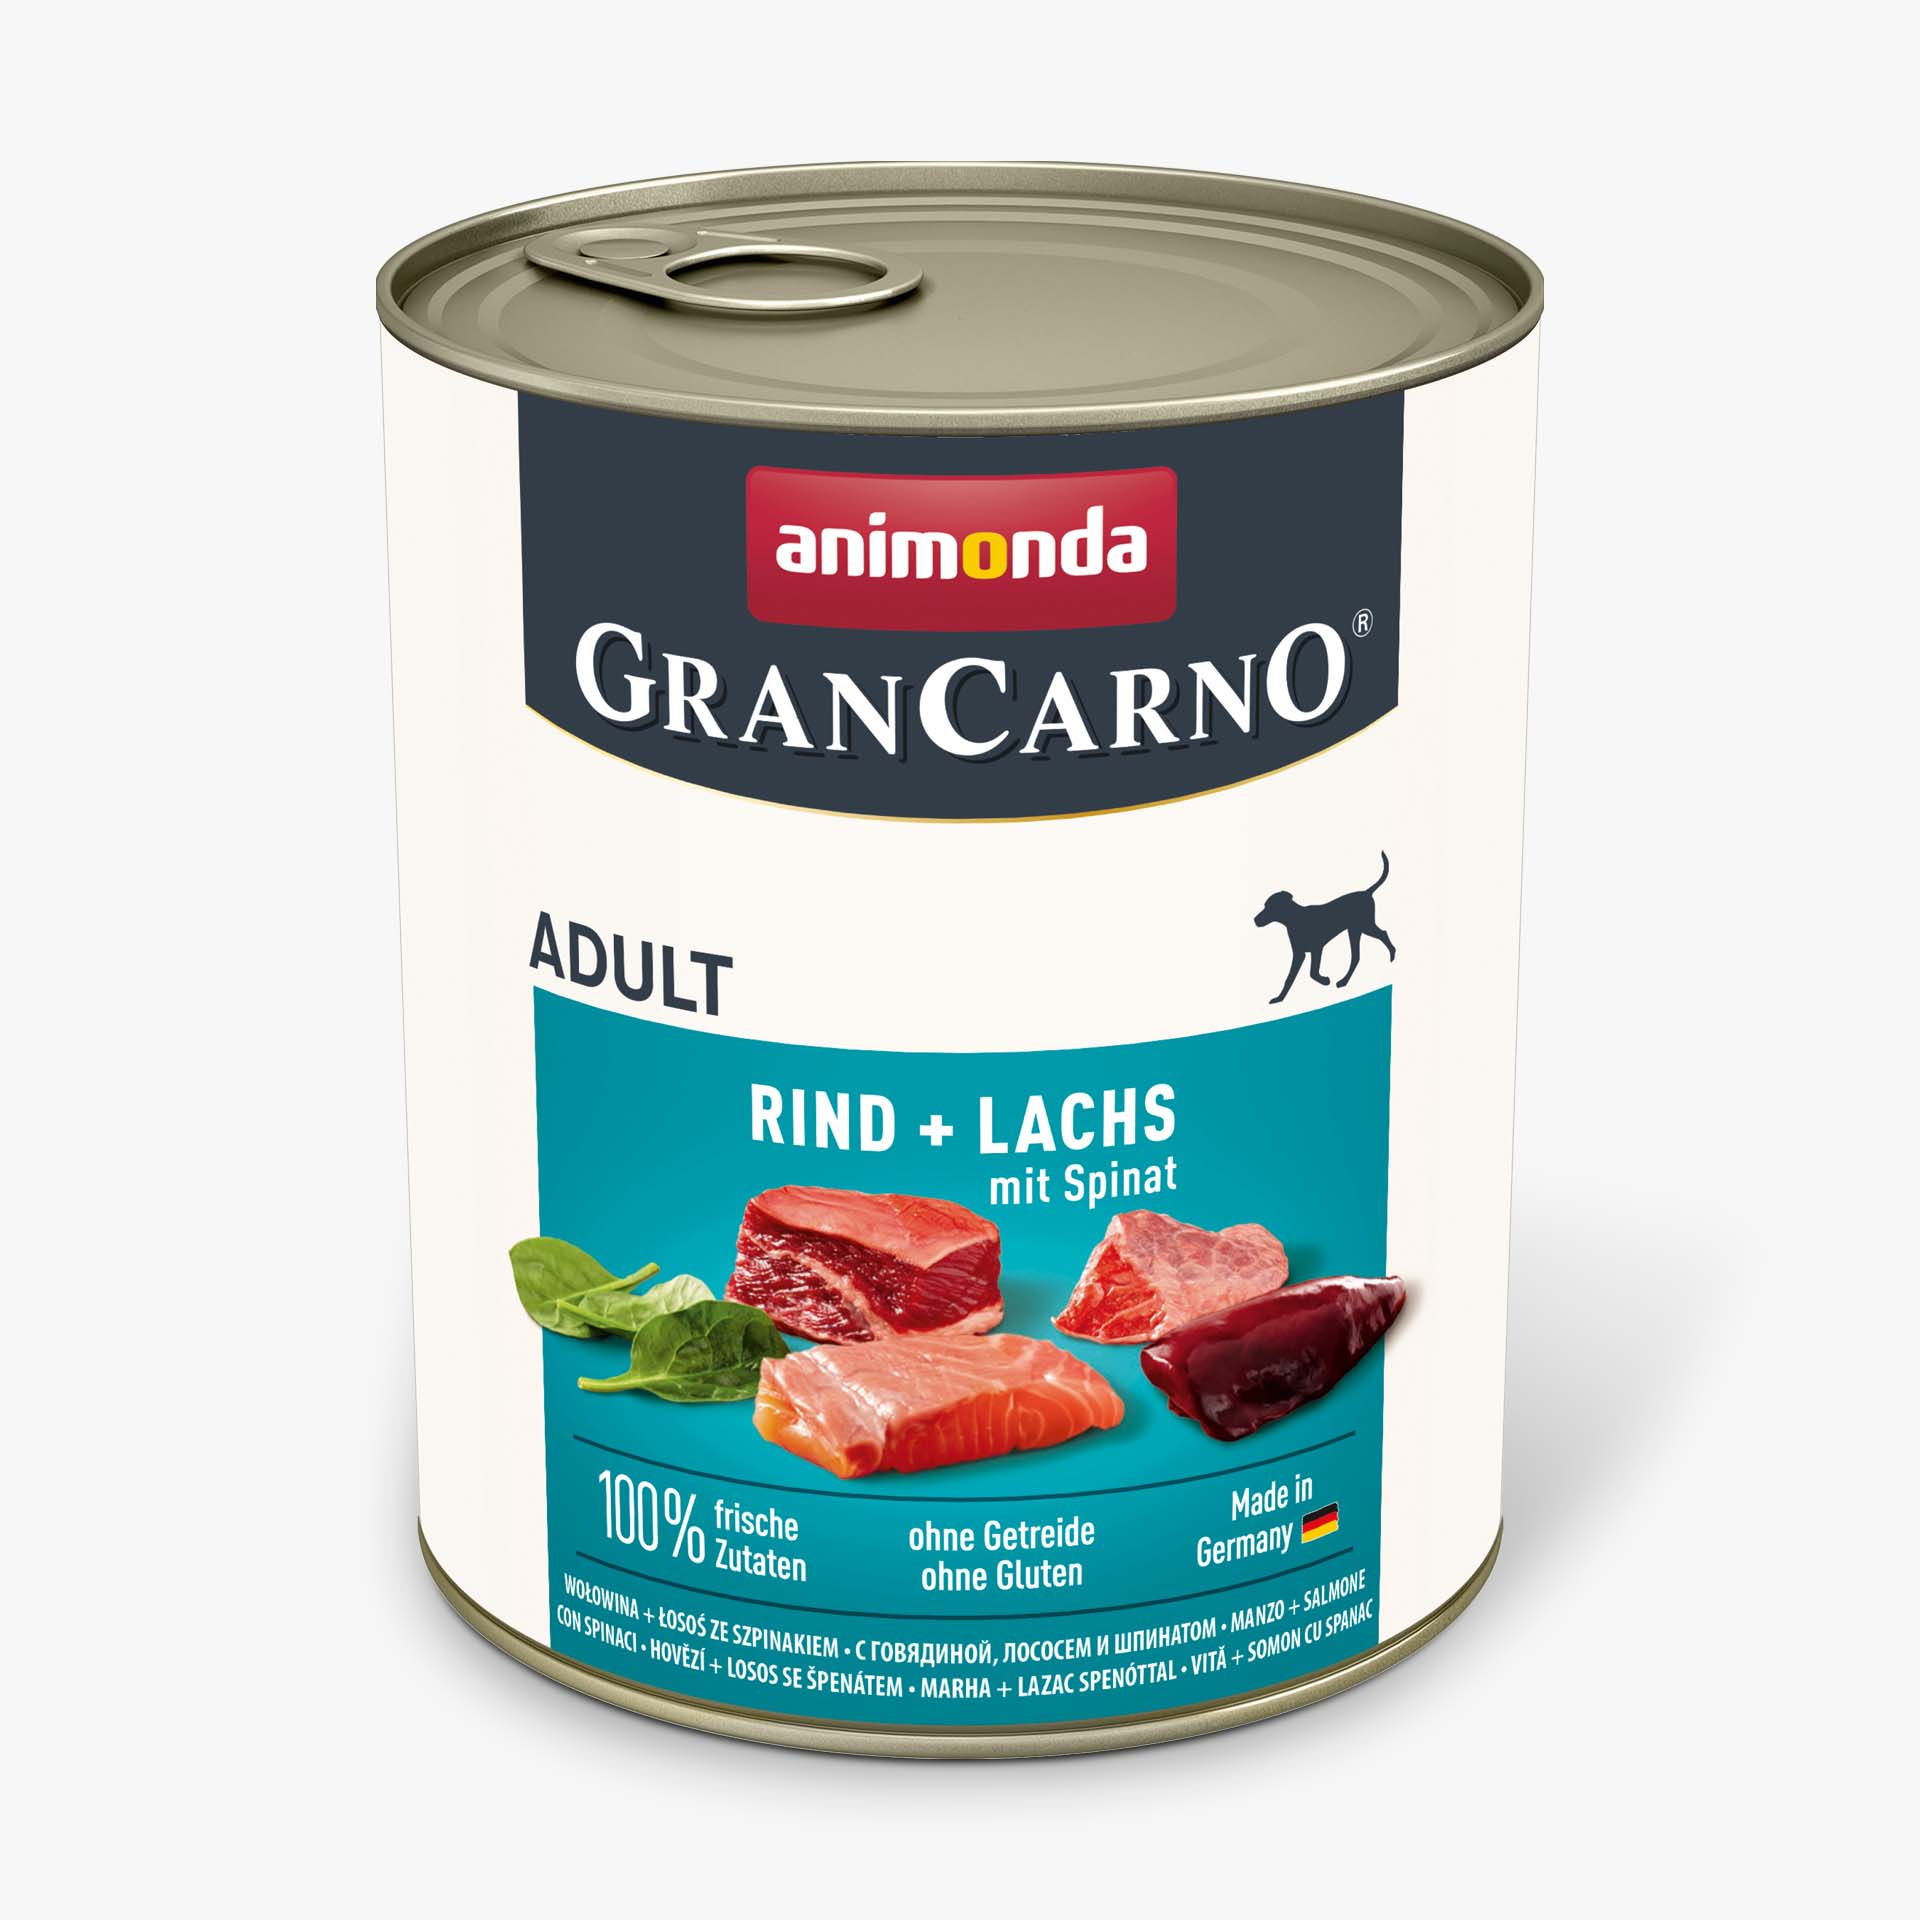 GranCarno Adult Rind + Lachs mit Spinat